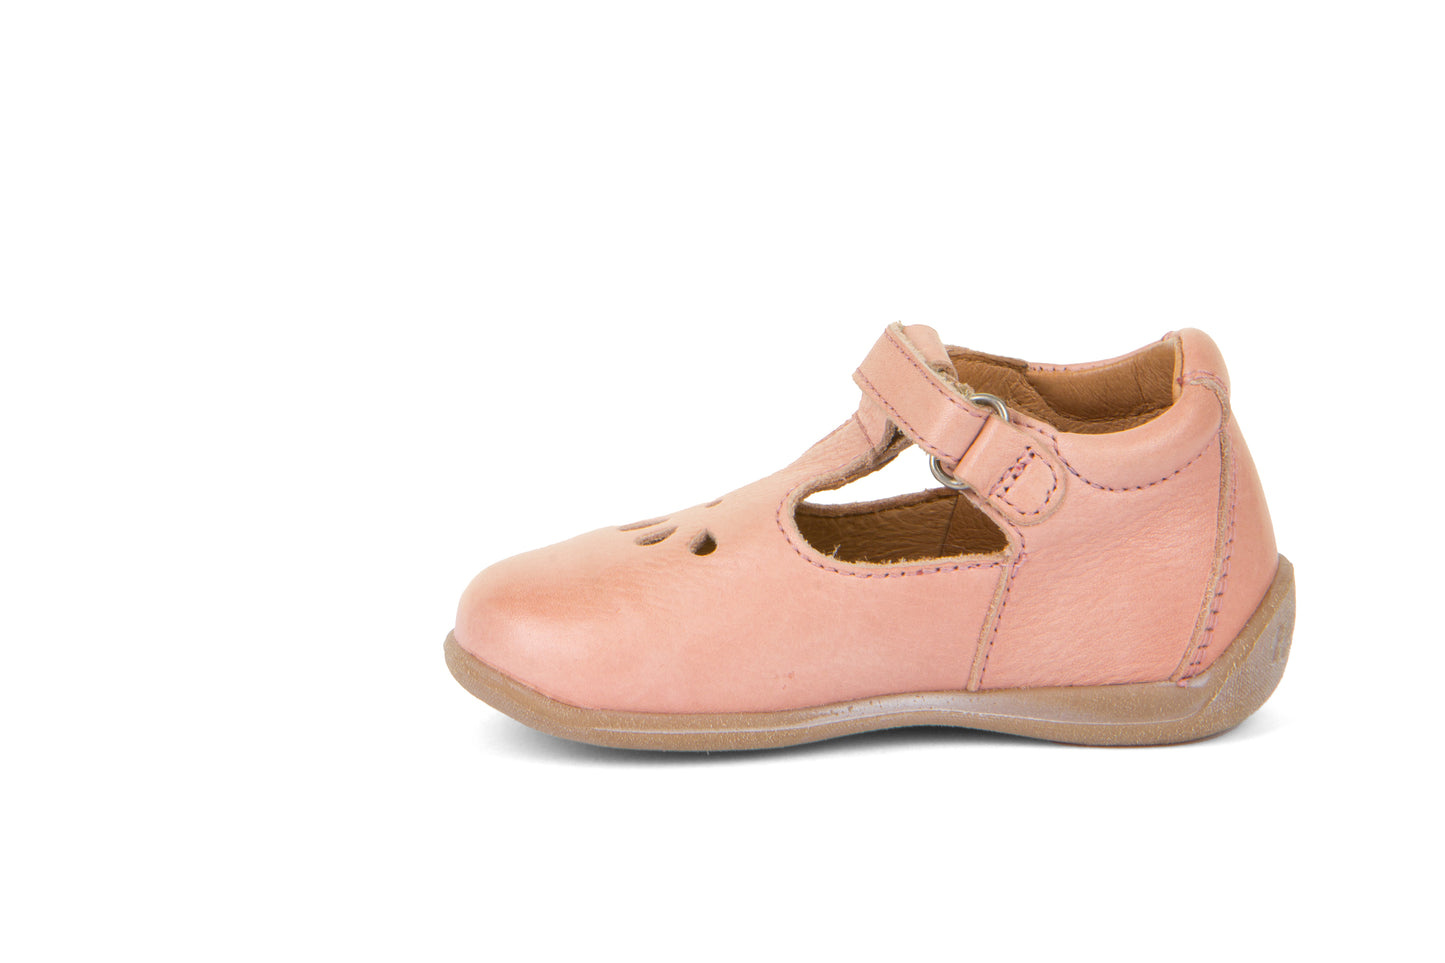 A girls shoe by Froddo, style G2140060-2 Gigi T-bar, in nude with teardrop cut out design, velcro fastening. Right inside view.